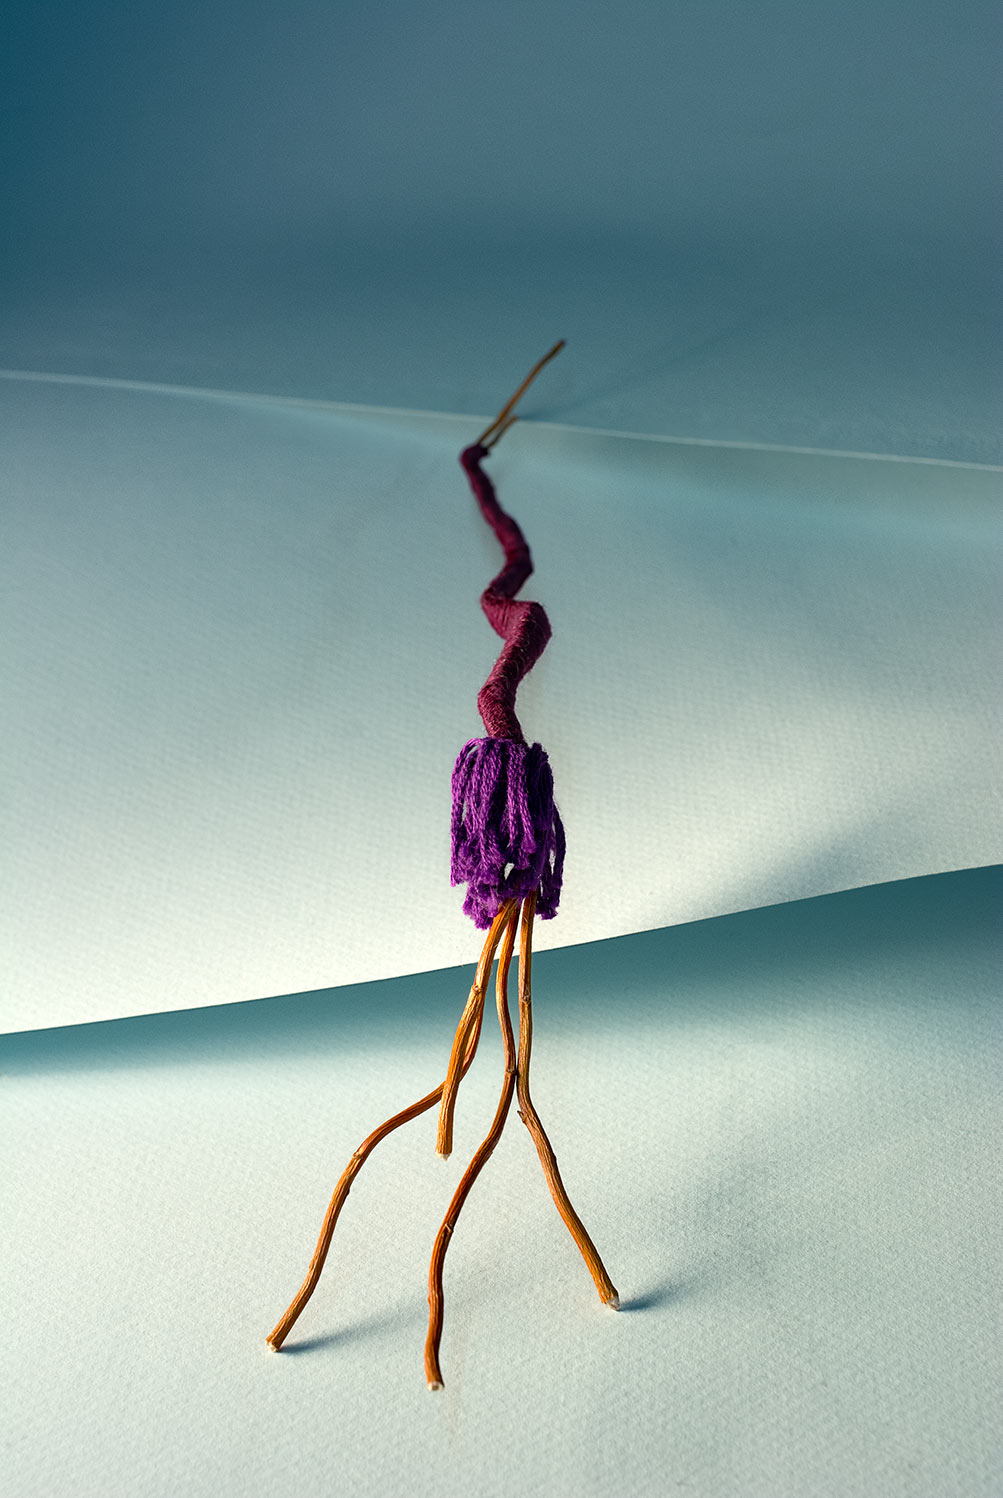 Blue Paper, Four Appendage Twigs Organism With Purple Thread. ©2019